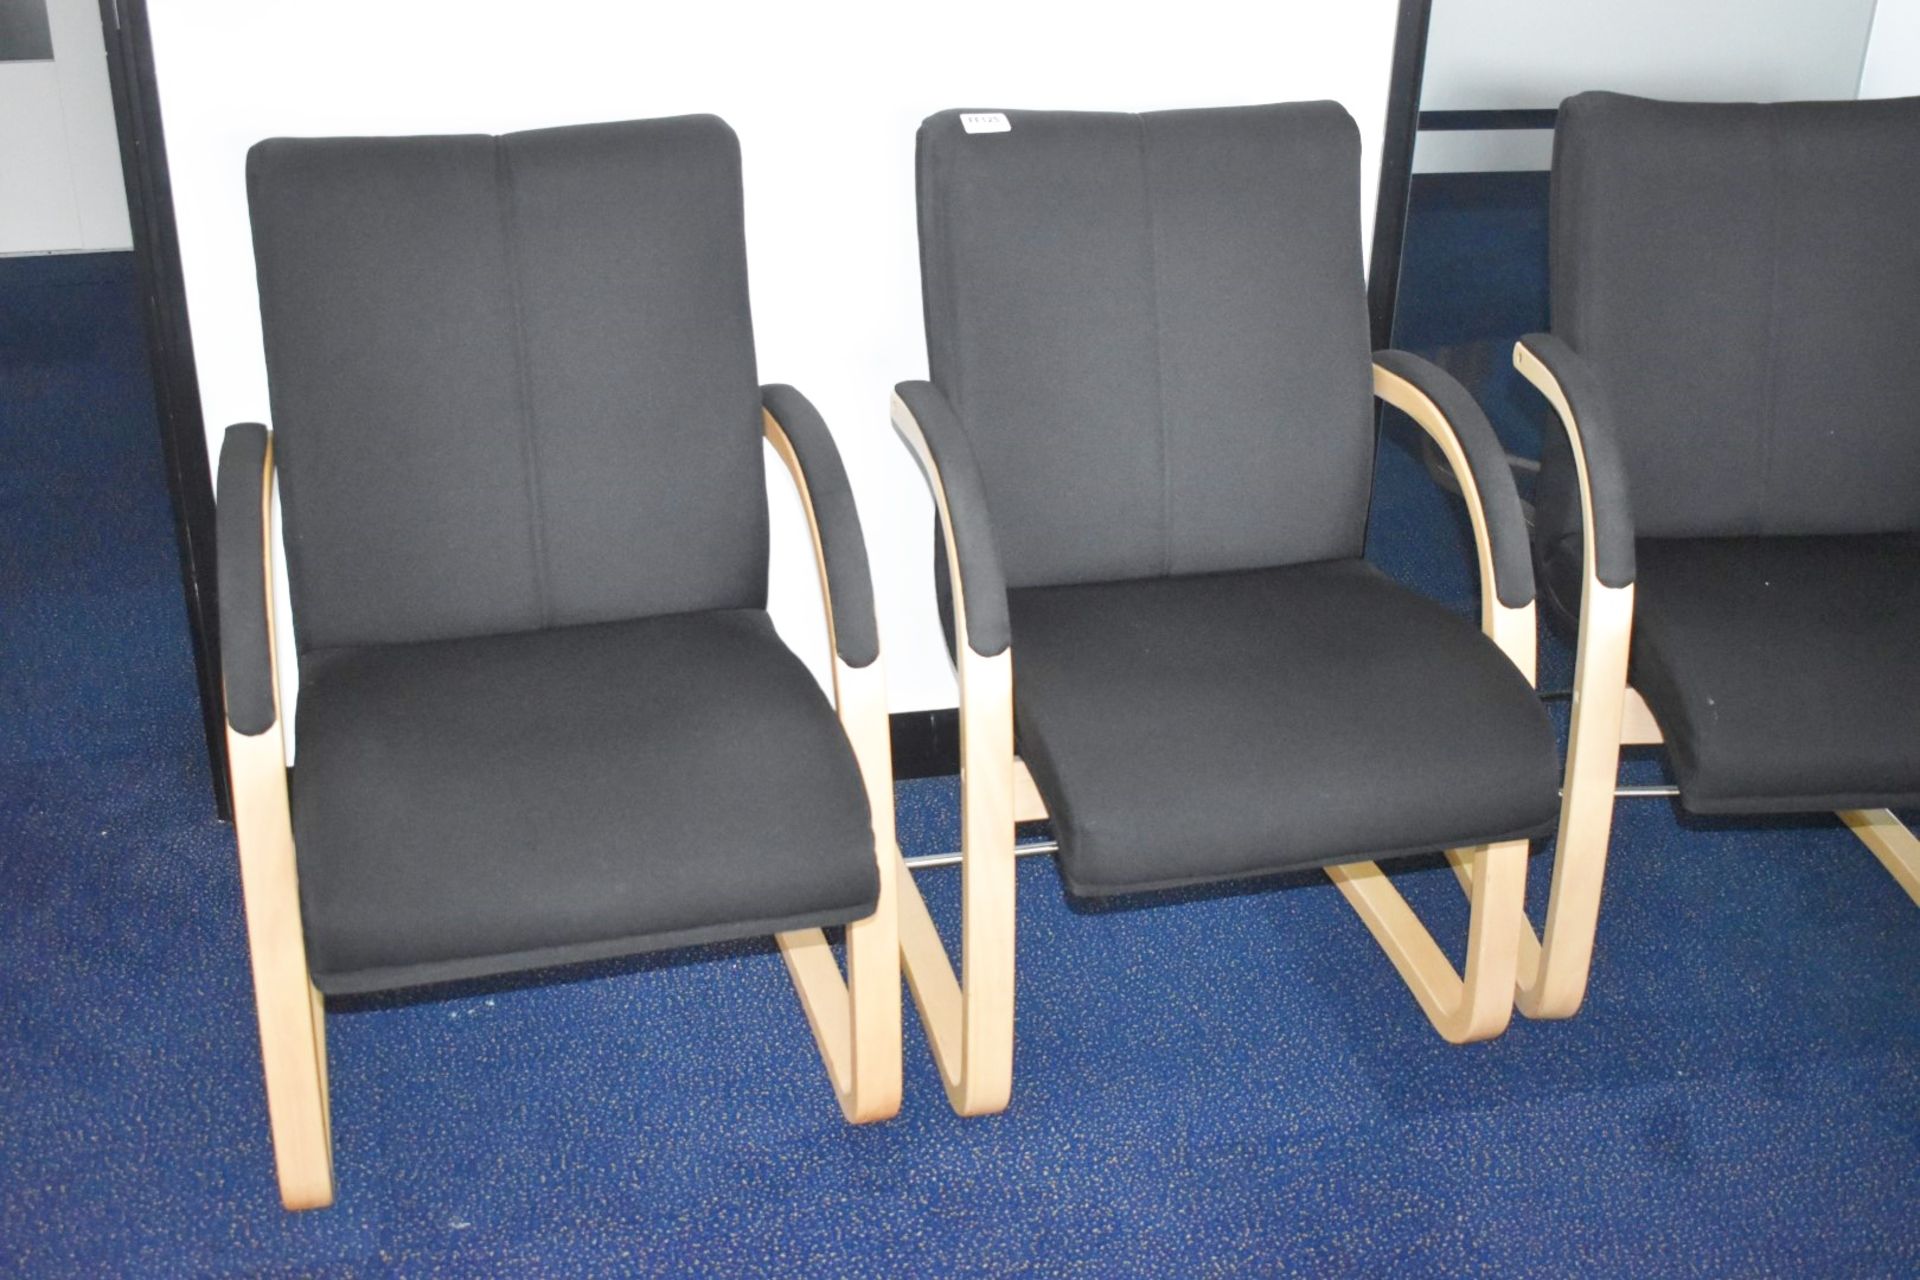 4 x Cantilever Office Meeting Chairs With Bentwood Frames and Black Fabric Seats -Â Manufactured - Image 4 of 7